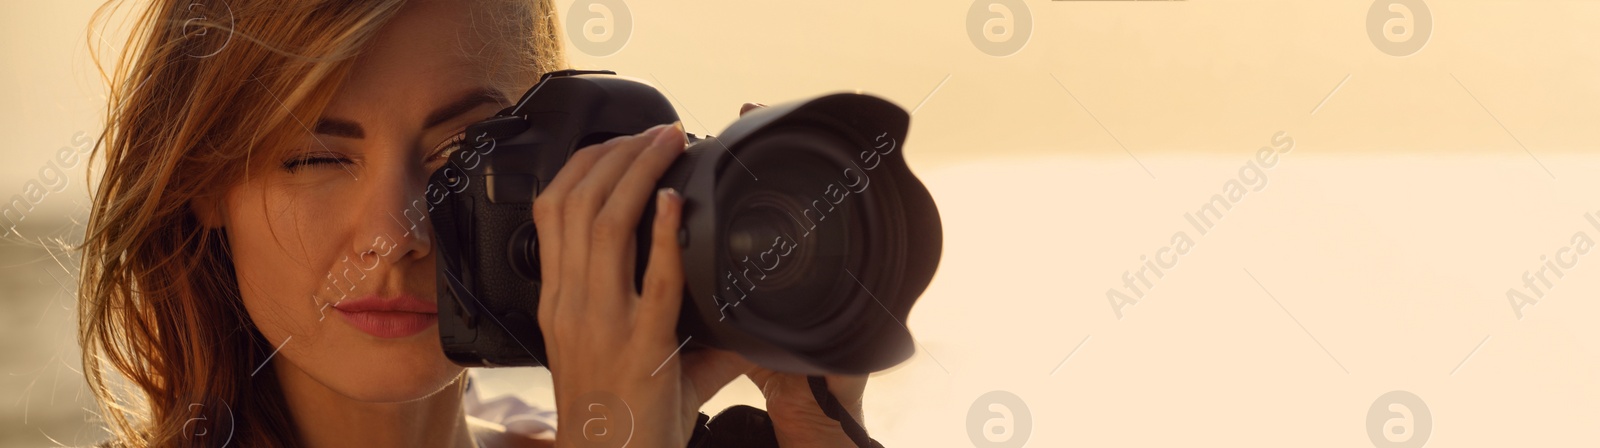 Image of Photographer taking photo with professional camera outdoors, space for text. Banner design